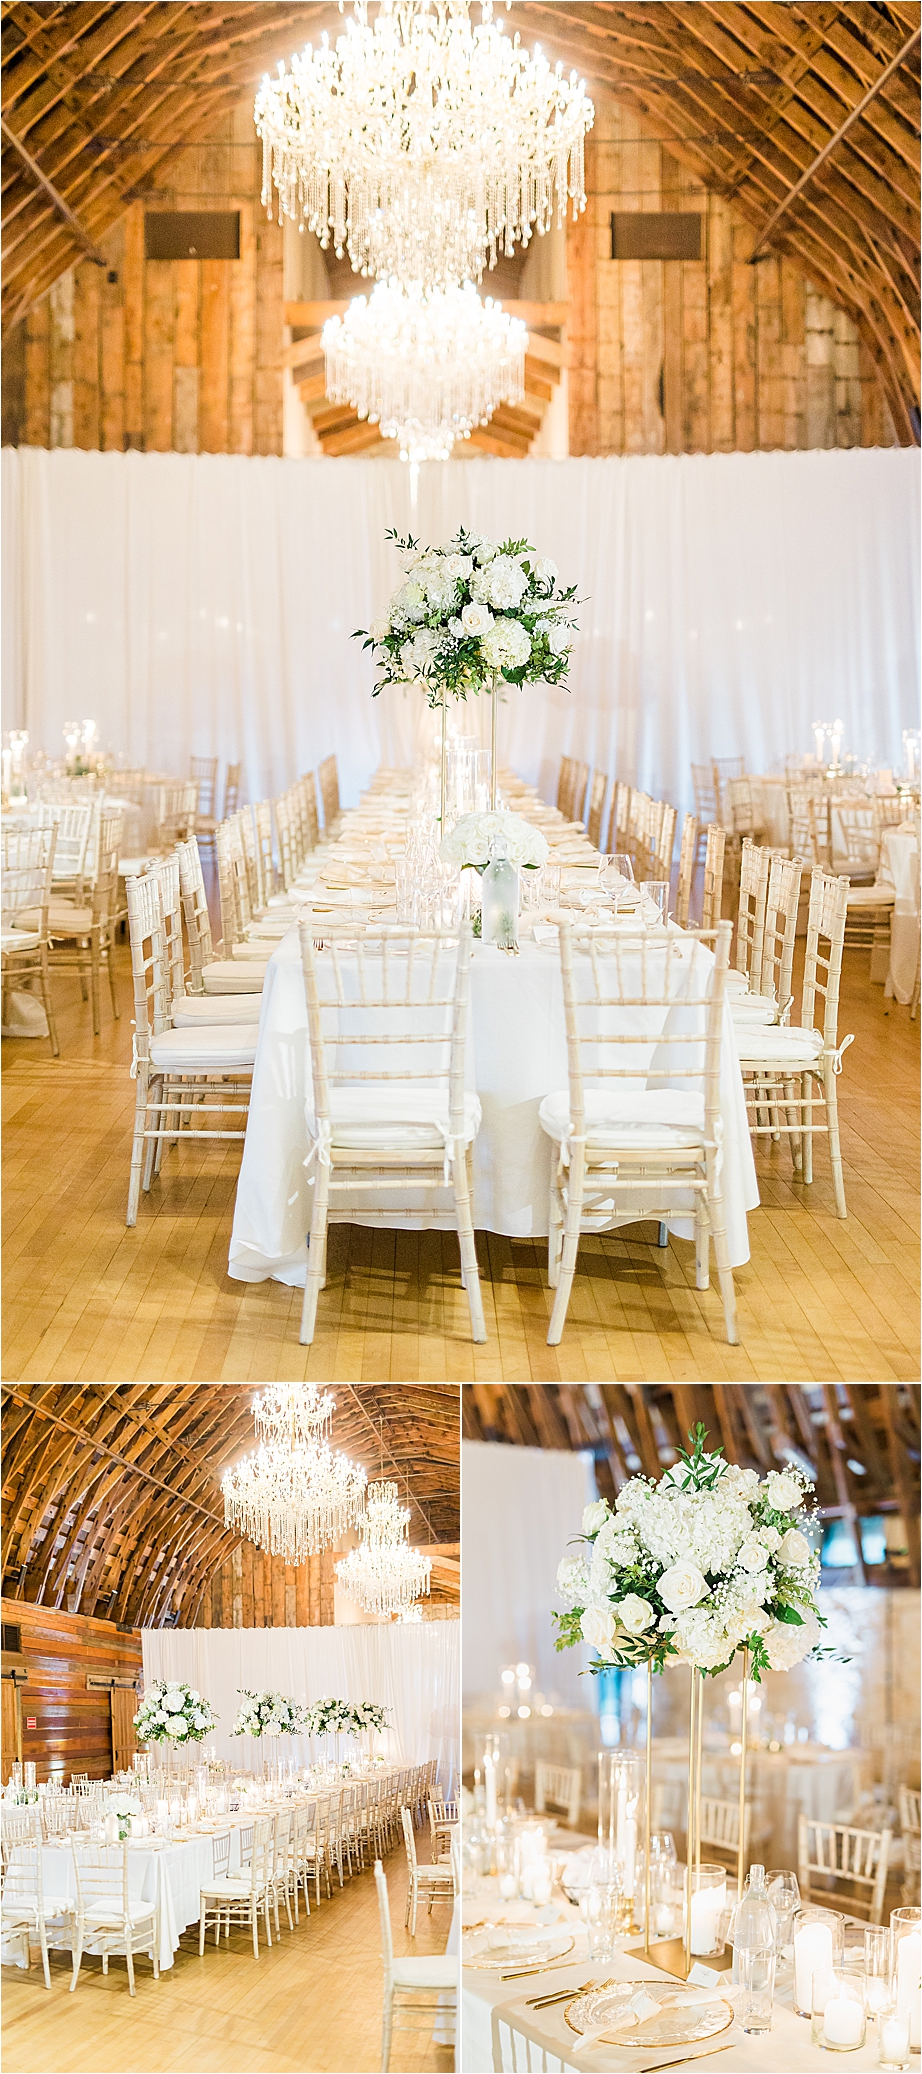 White table clothes, gold chairs, large white bouquets, chandeliers and candlelight in a decorated brown barn for a wedding in Austin, Texas